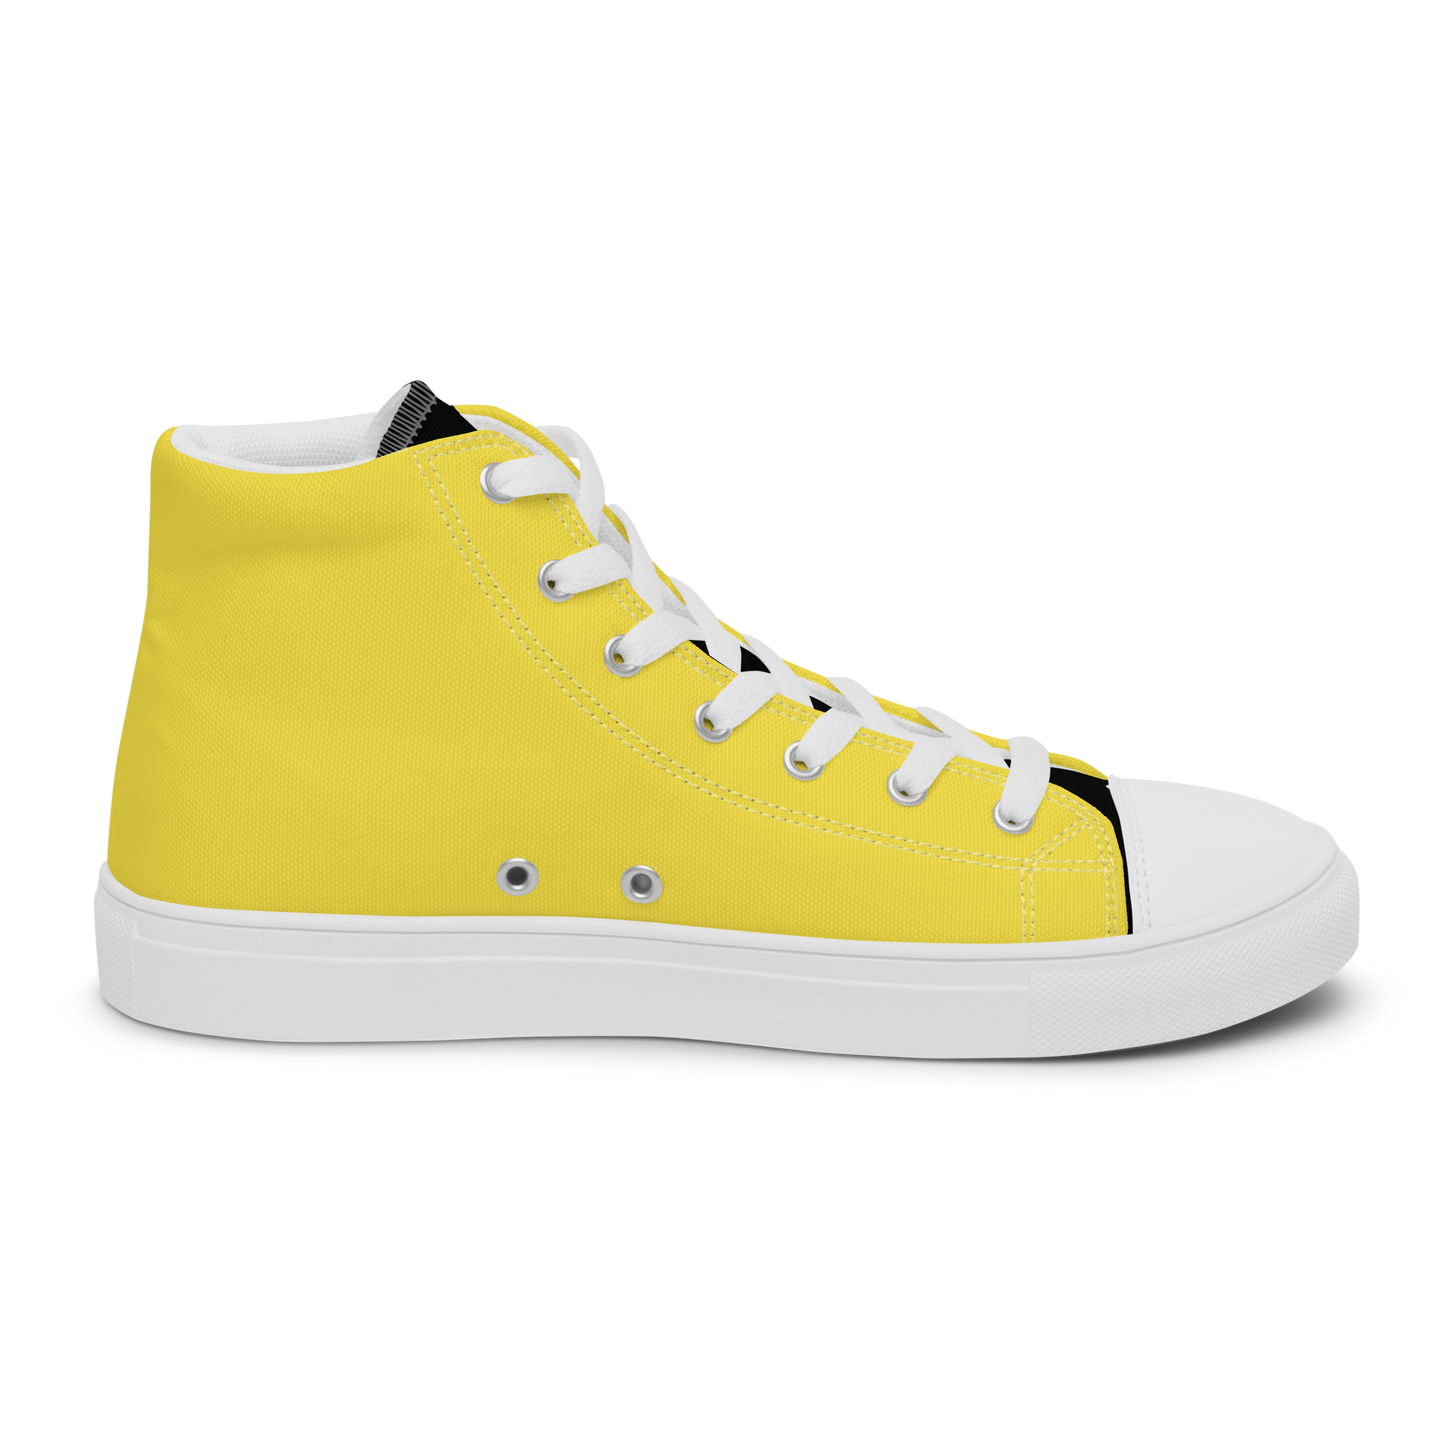 Women’s High Top Canvas Shoes - The Alternative